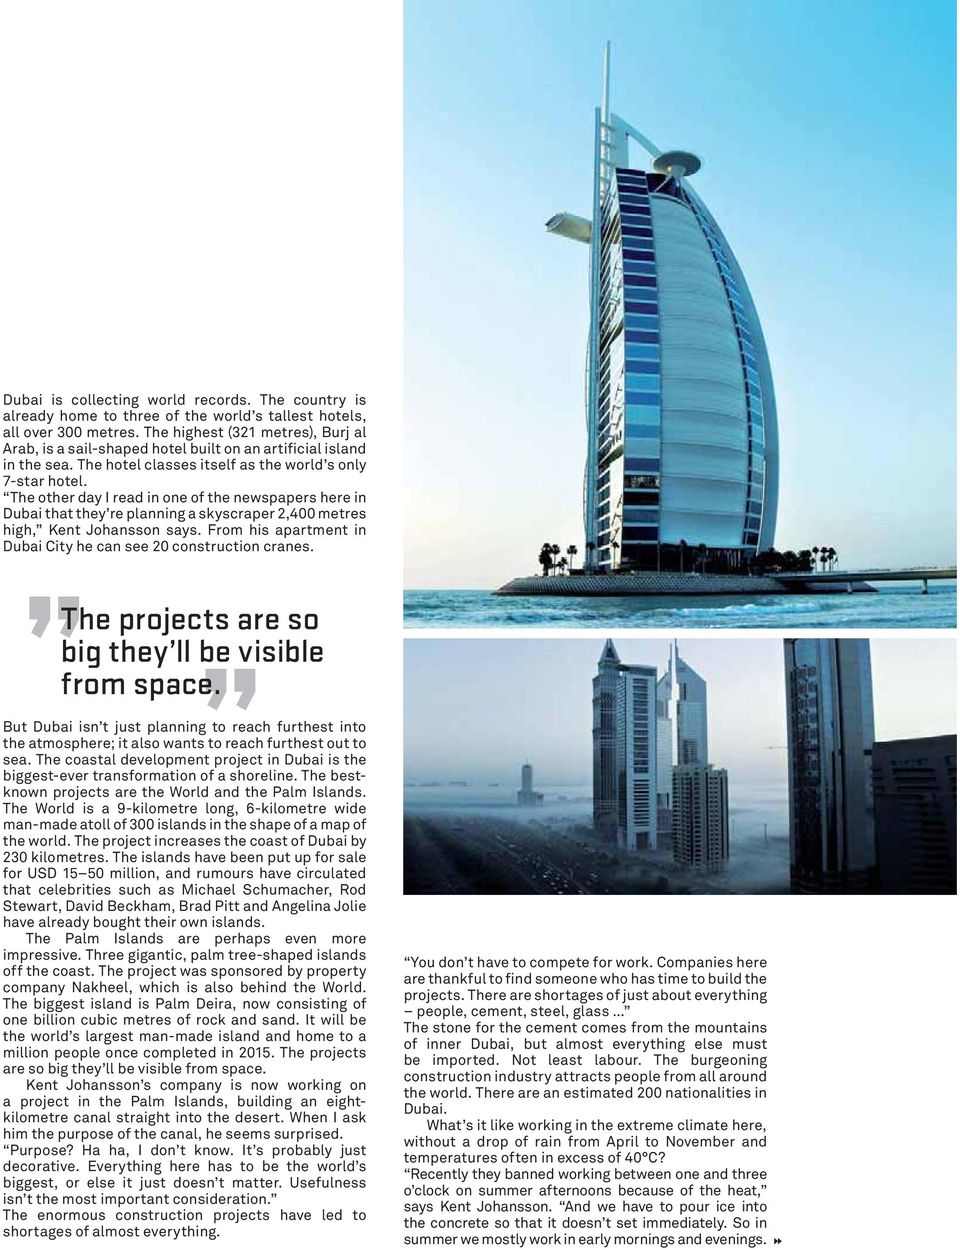 The other day I read in one of the newspapers here in Dubai that they re planning a skyscraper 2,400 metres high, Kent Johansson says.